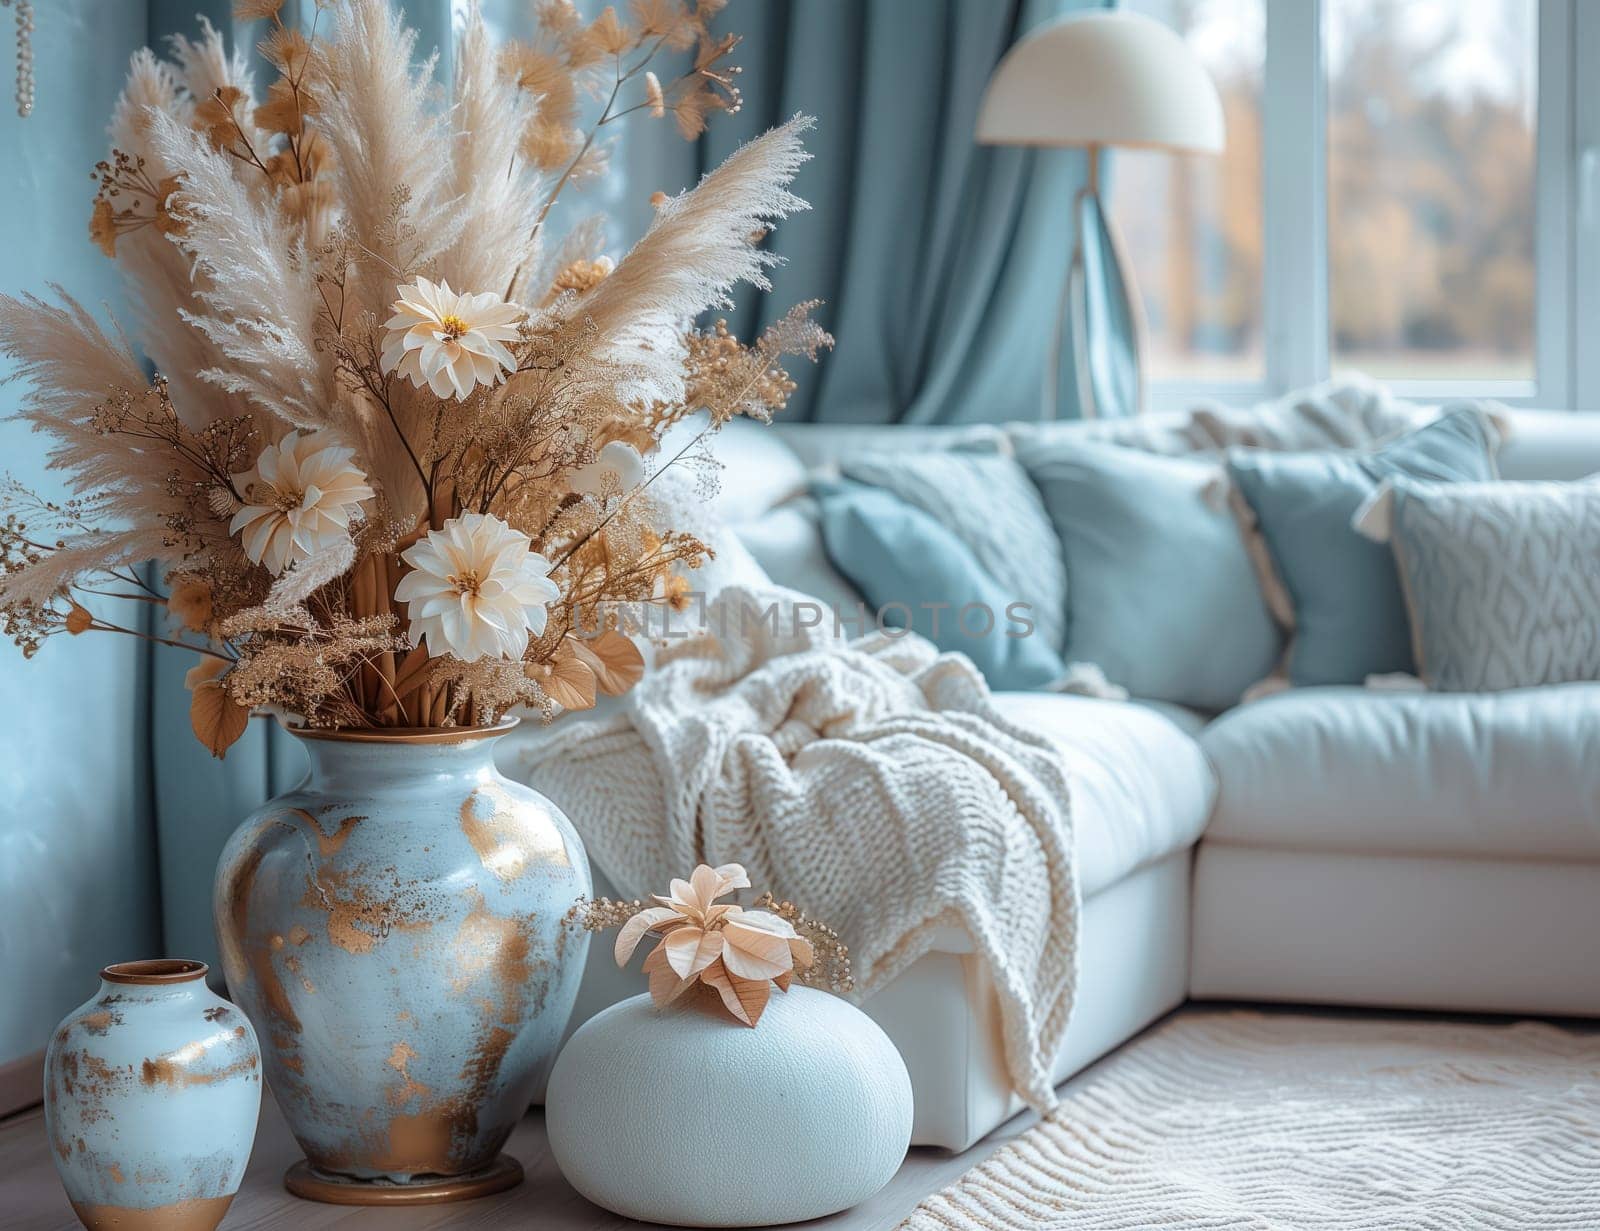 Interior design with couch, vases, and pampas grass creating a cozy atmosphere by richwolf